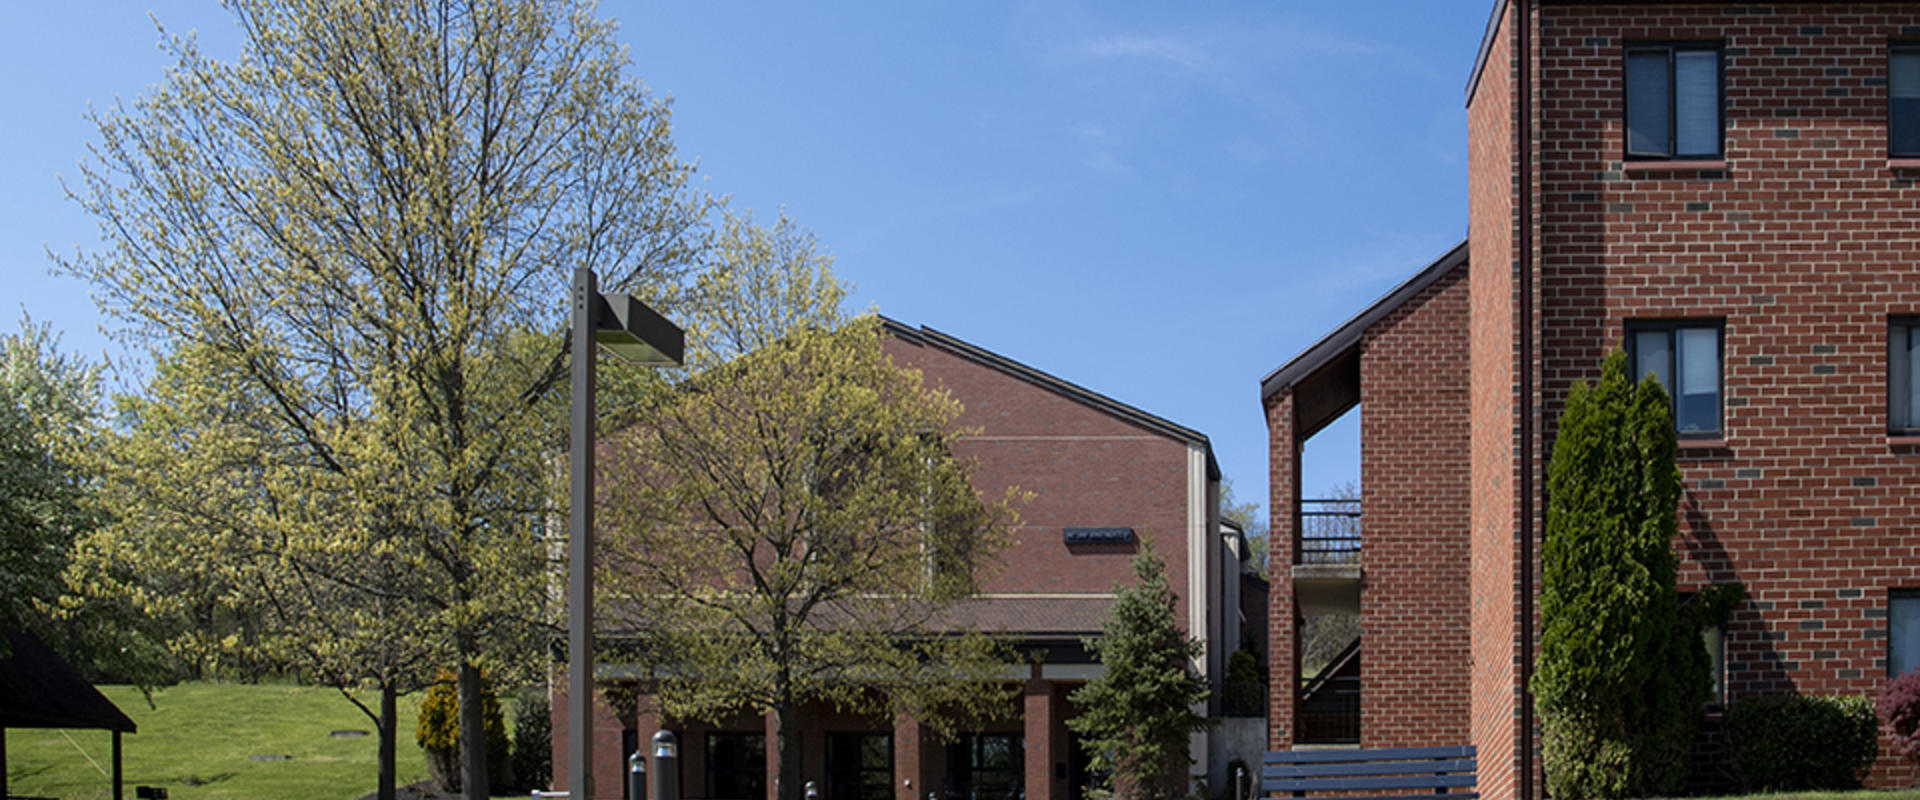 The Nittany Apartments residence complex at Penn State Schuylkill includes 308 beds spread across five apartment-style buildings. 